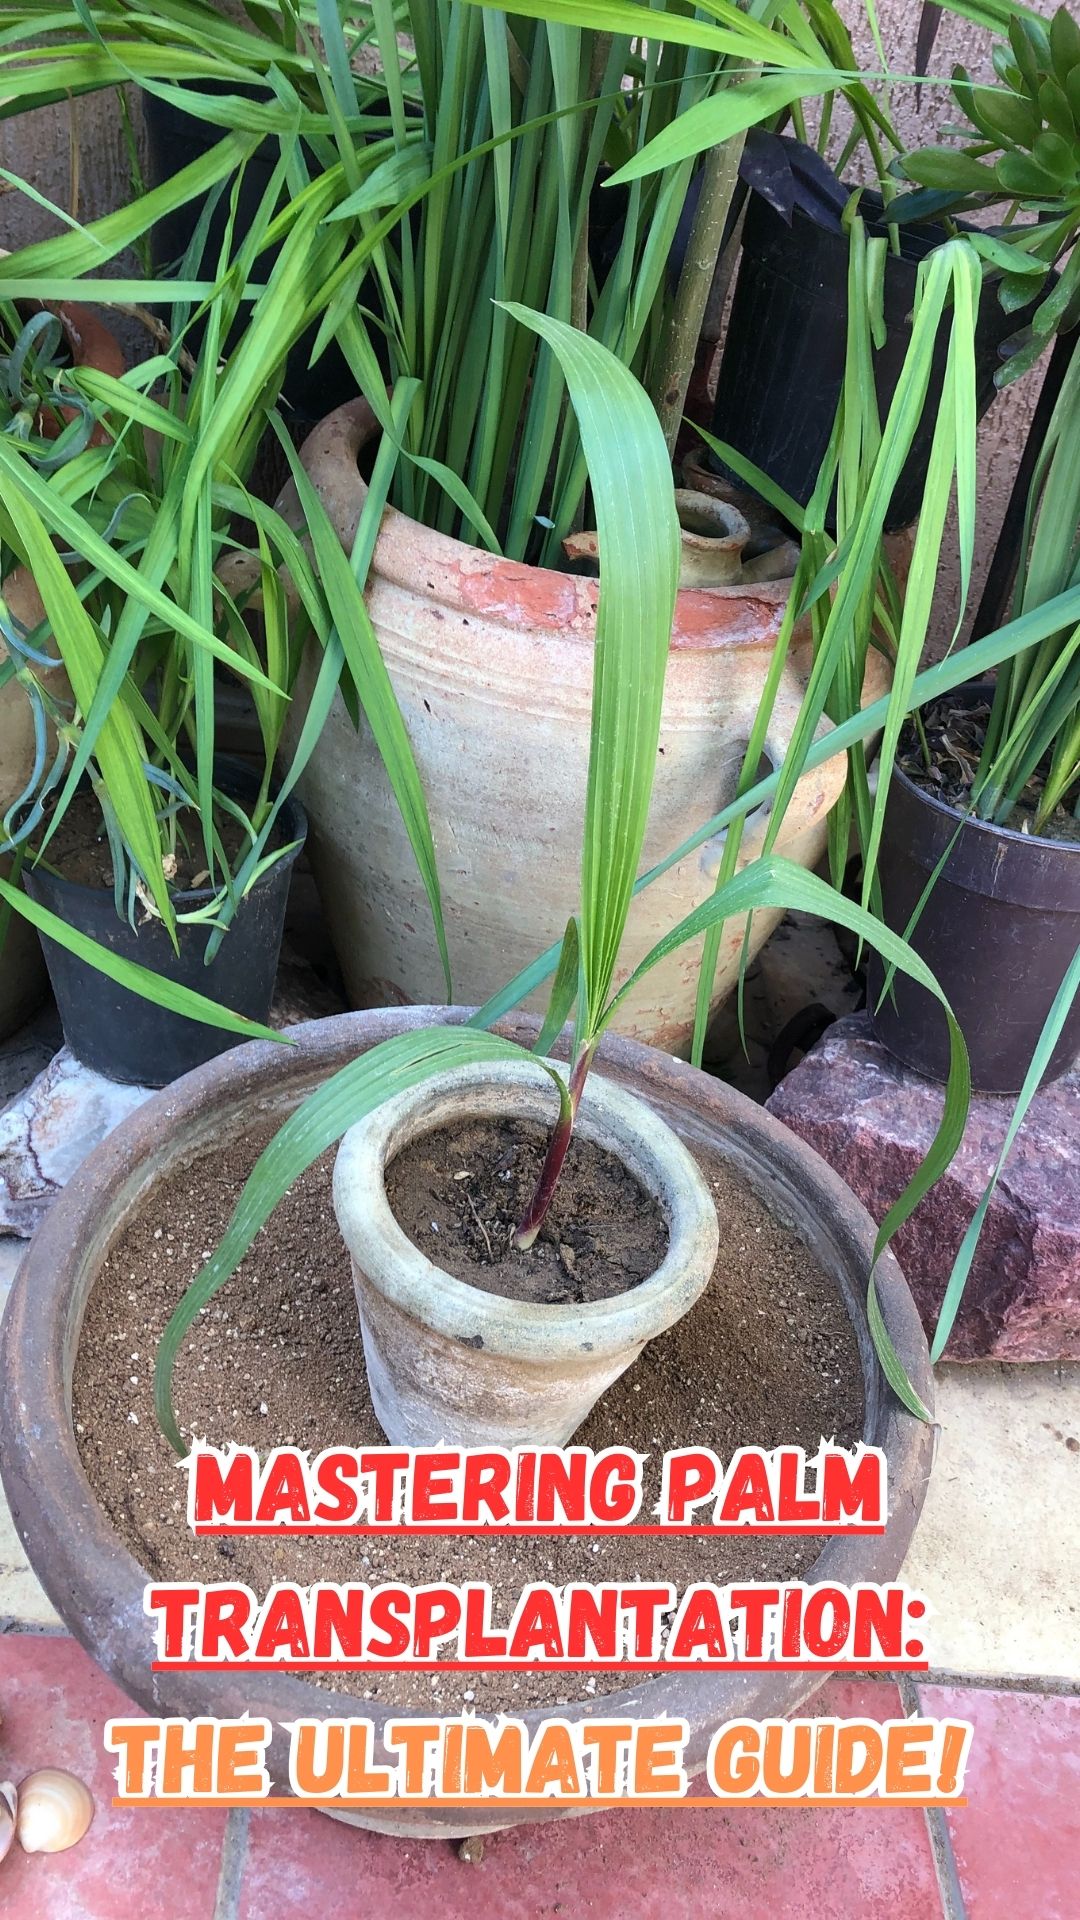 Dive into the lush world of palm transplantation with our latest tutorial! 🌱 Whether you're a seasoned green thumb or just getting started, this step-by-step guide will show you the perfect technique for transplanting palms into containers.